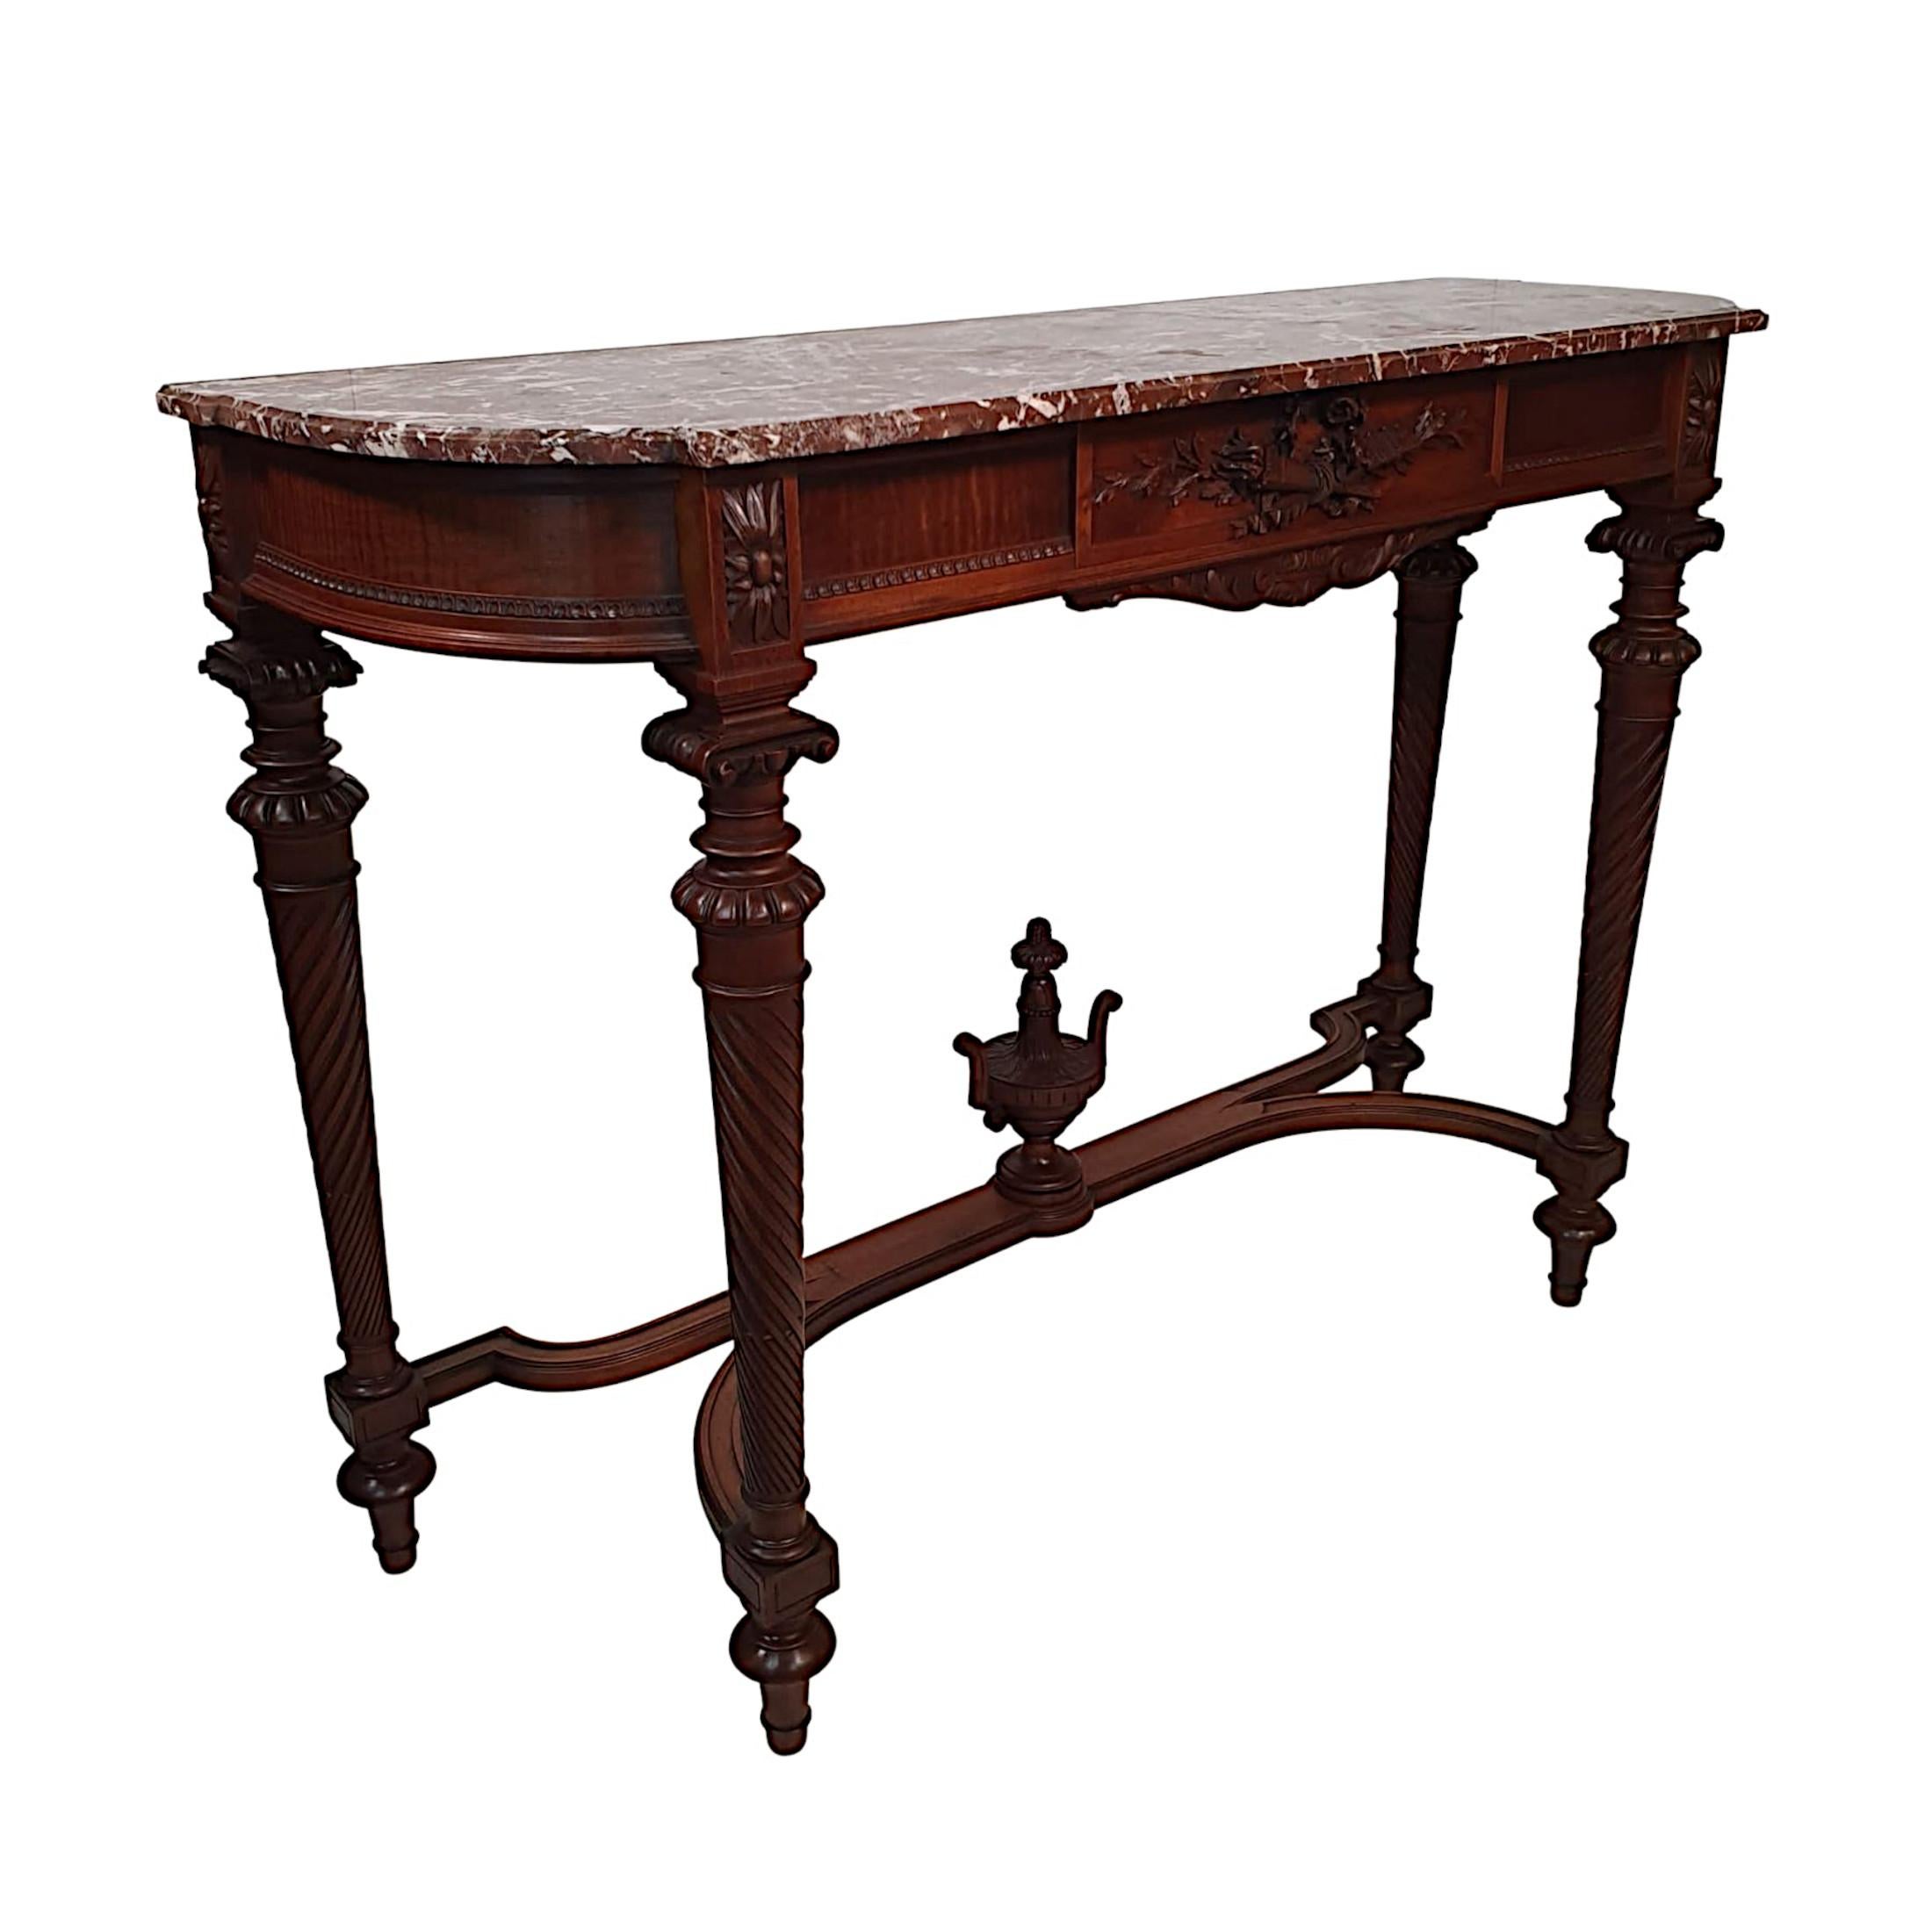 A lovely quality early 20th Century marble top mahogany console table. The shaped and moulded Rosso Levante marble top raised over panelled frieze with applied flowerhead paterae, egg and dart detail. The central panel with Neoclassical motifs of